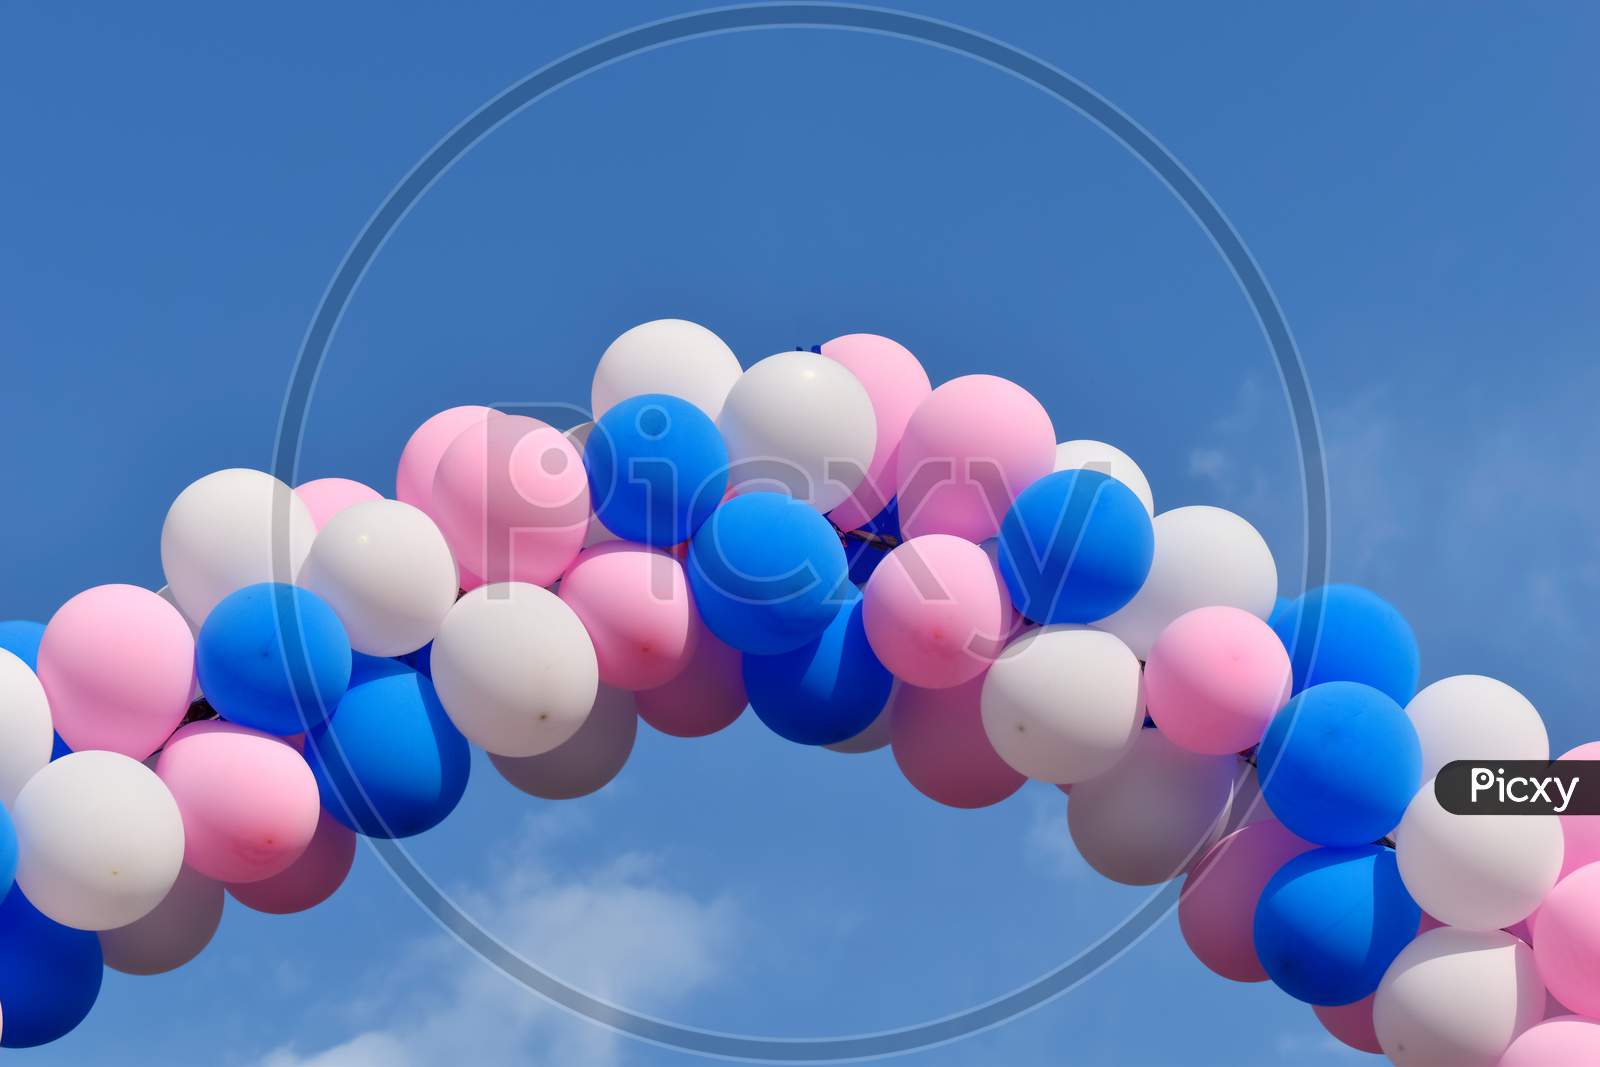 Pictures of balloons of different colors under the blue sky